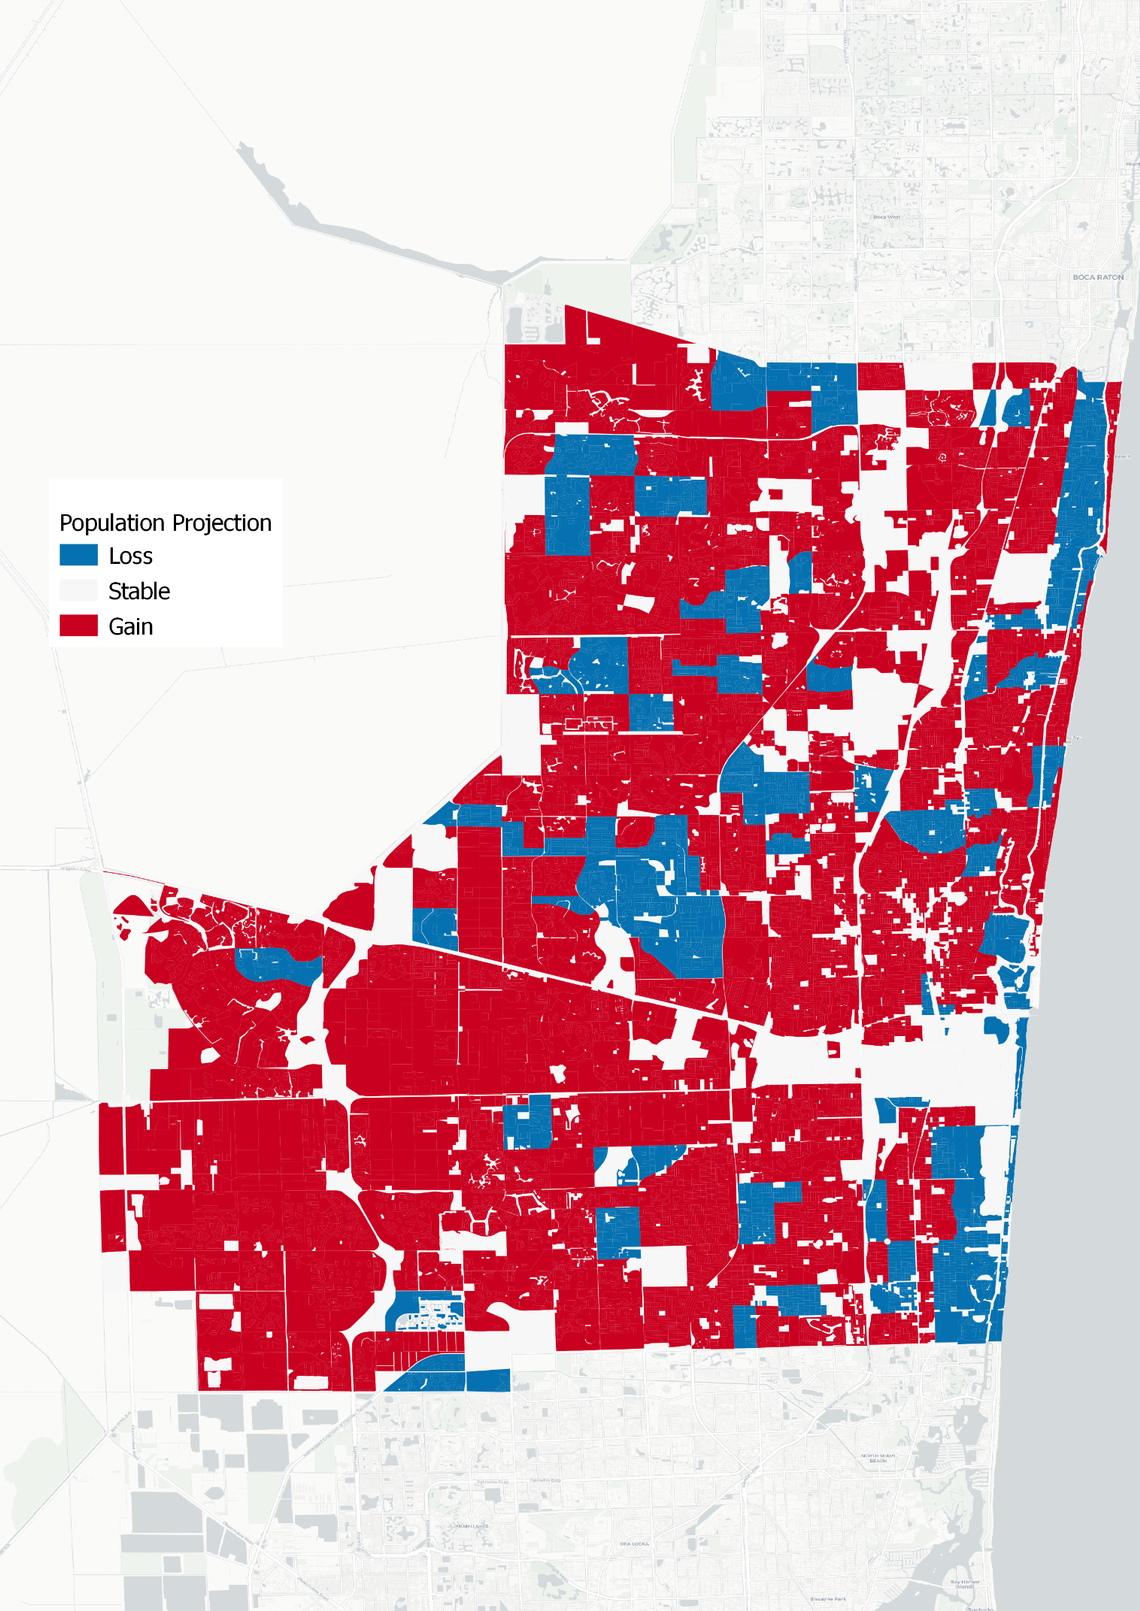 This map suggests the places in Broward County that could see population growth (in red) or decline (in blue) over the next few decades as sea level-rise induced flooding begins to affect property values.